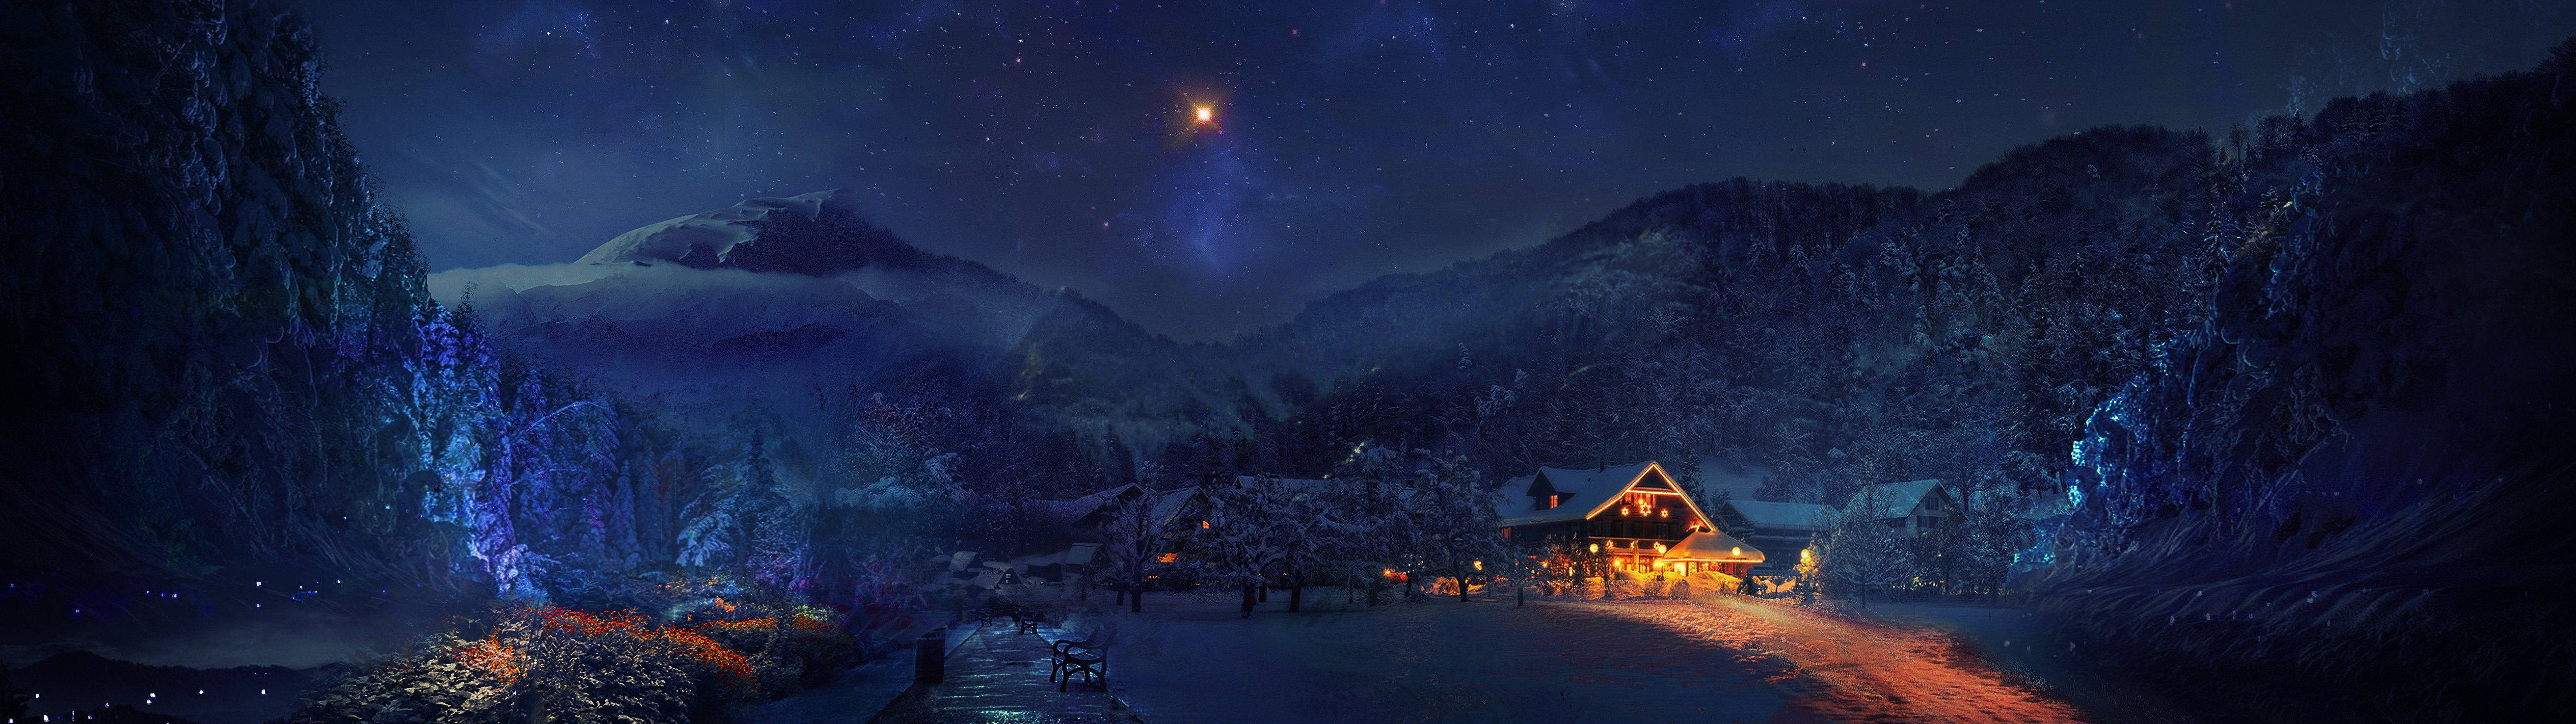 Cottage In Winter Night